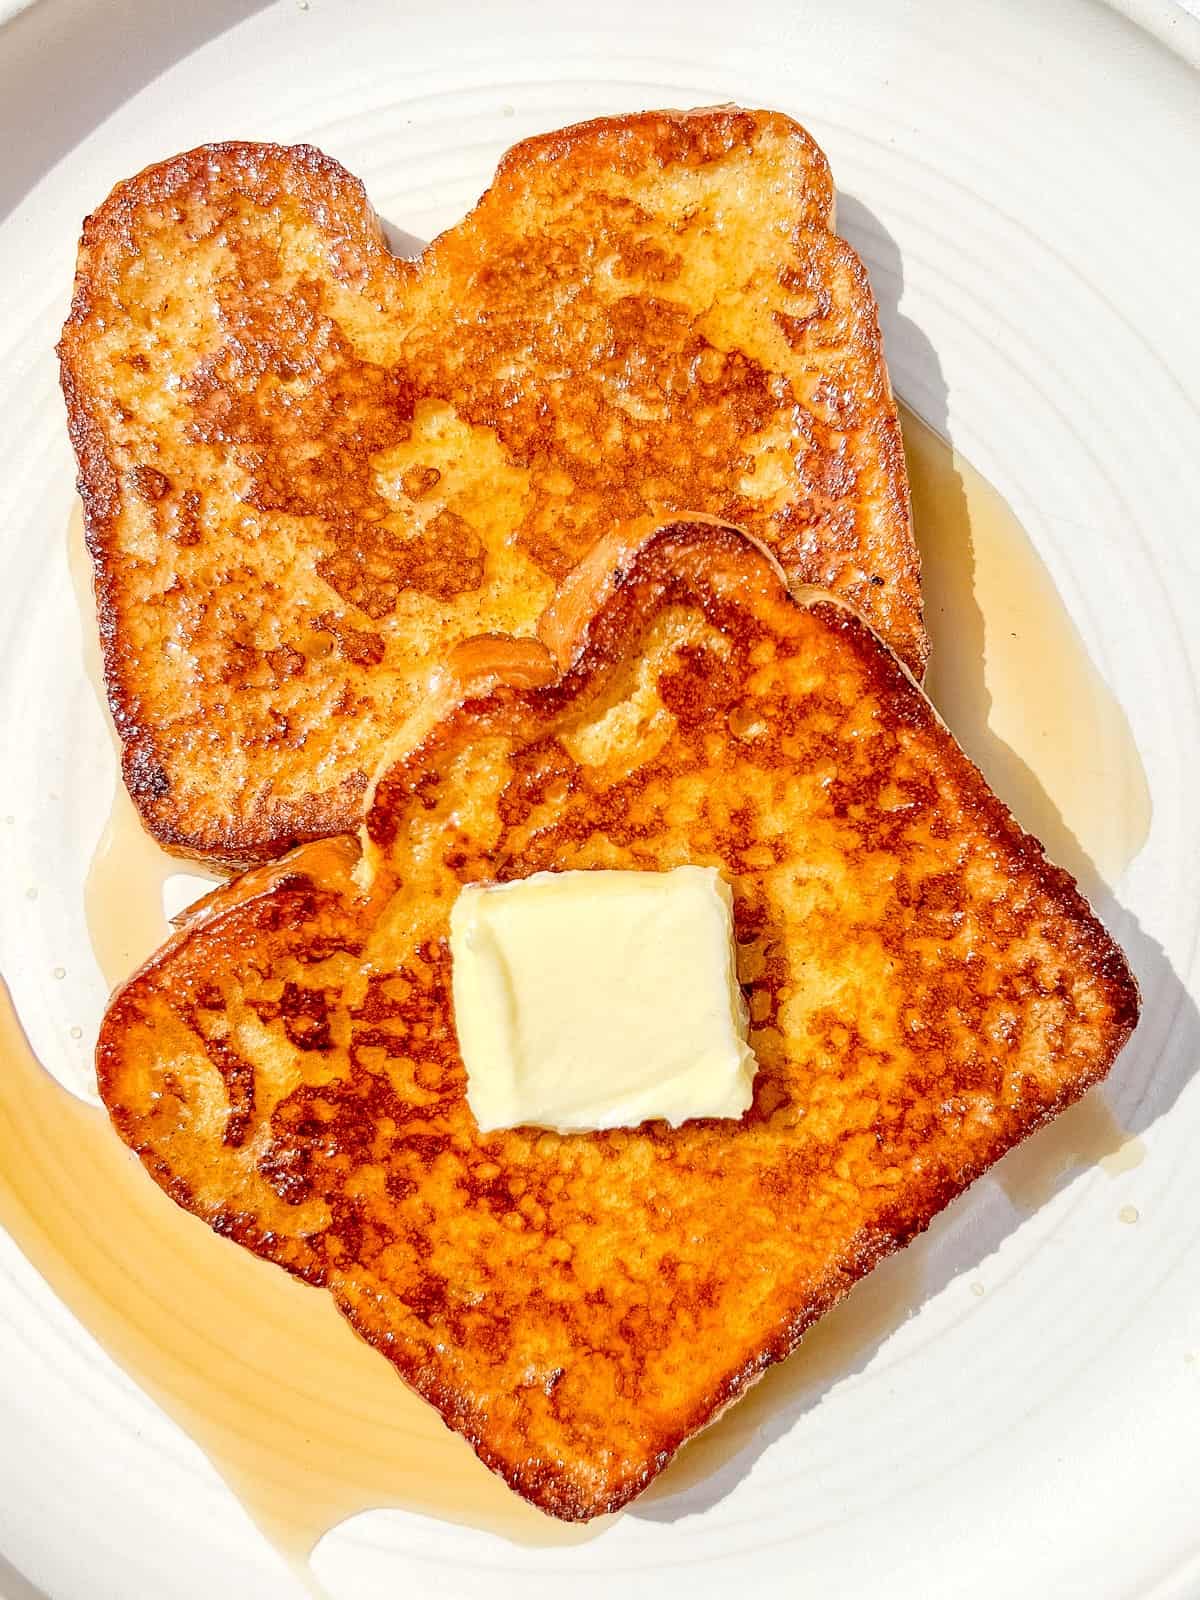 Two slices of cinnamon cardamom french toast on a white plate.